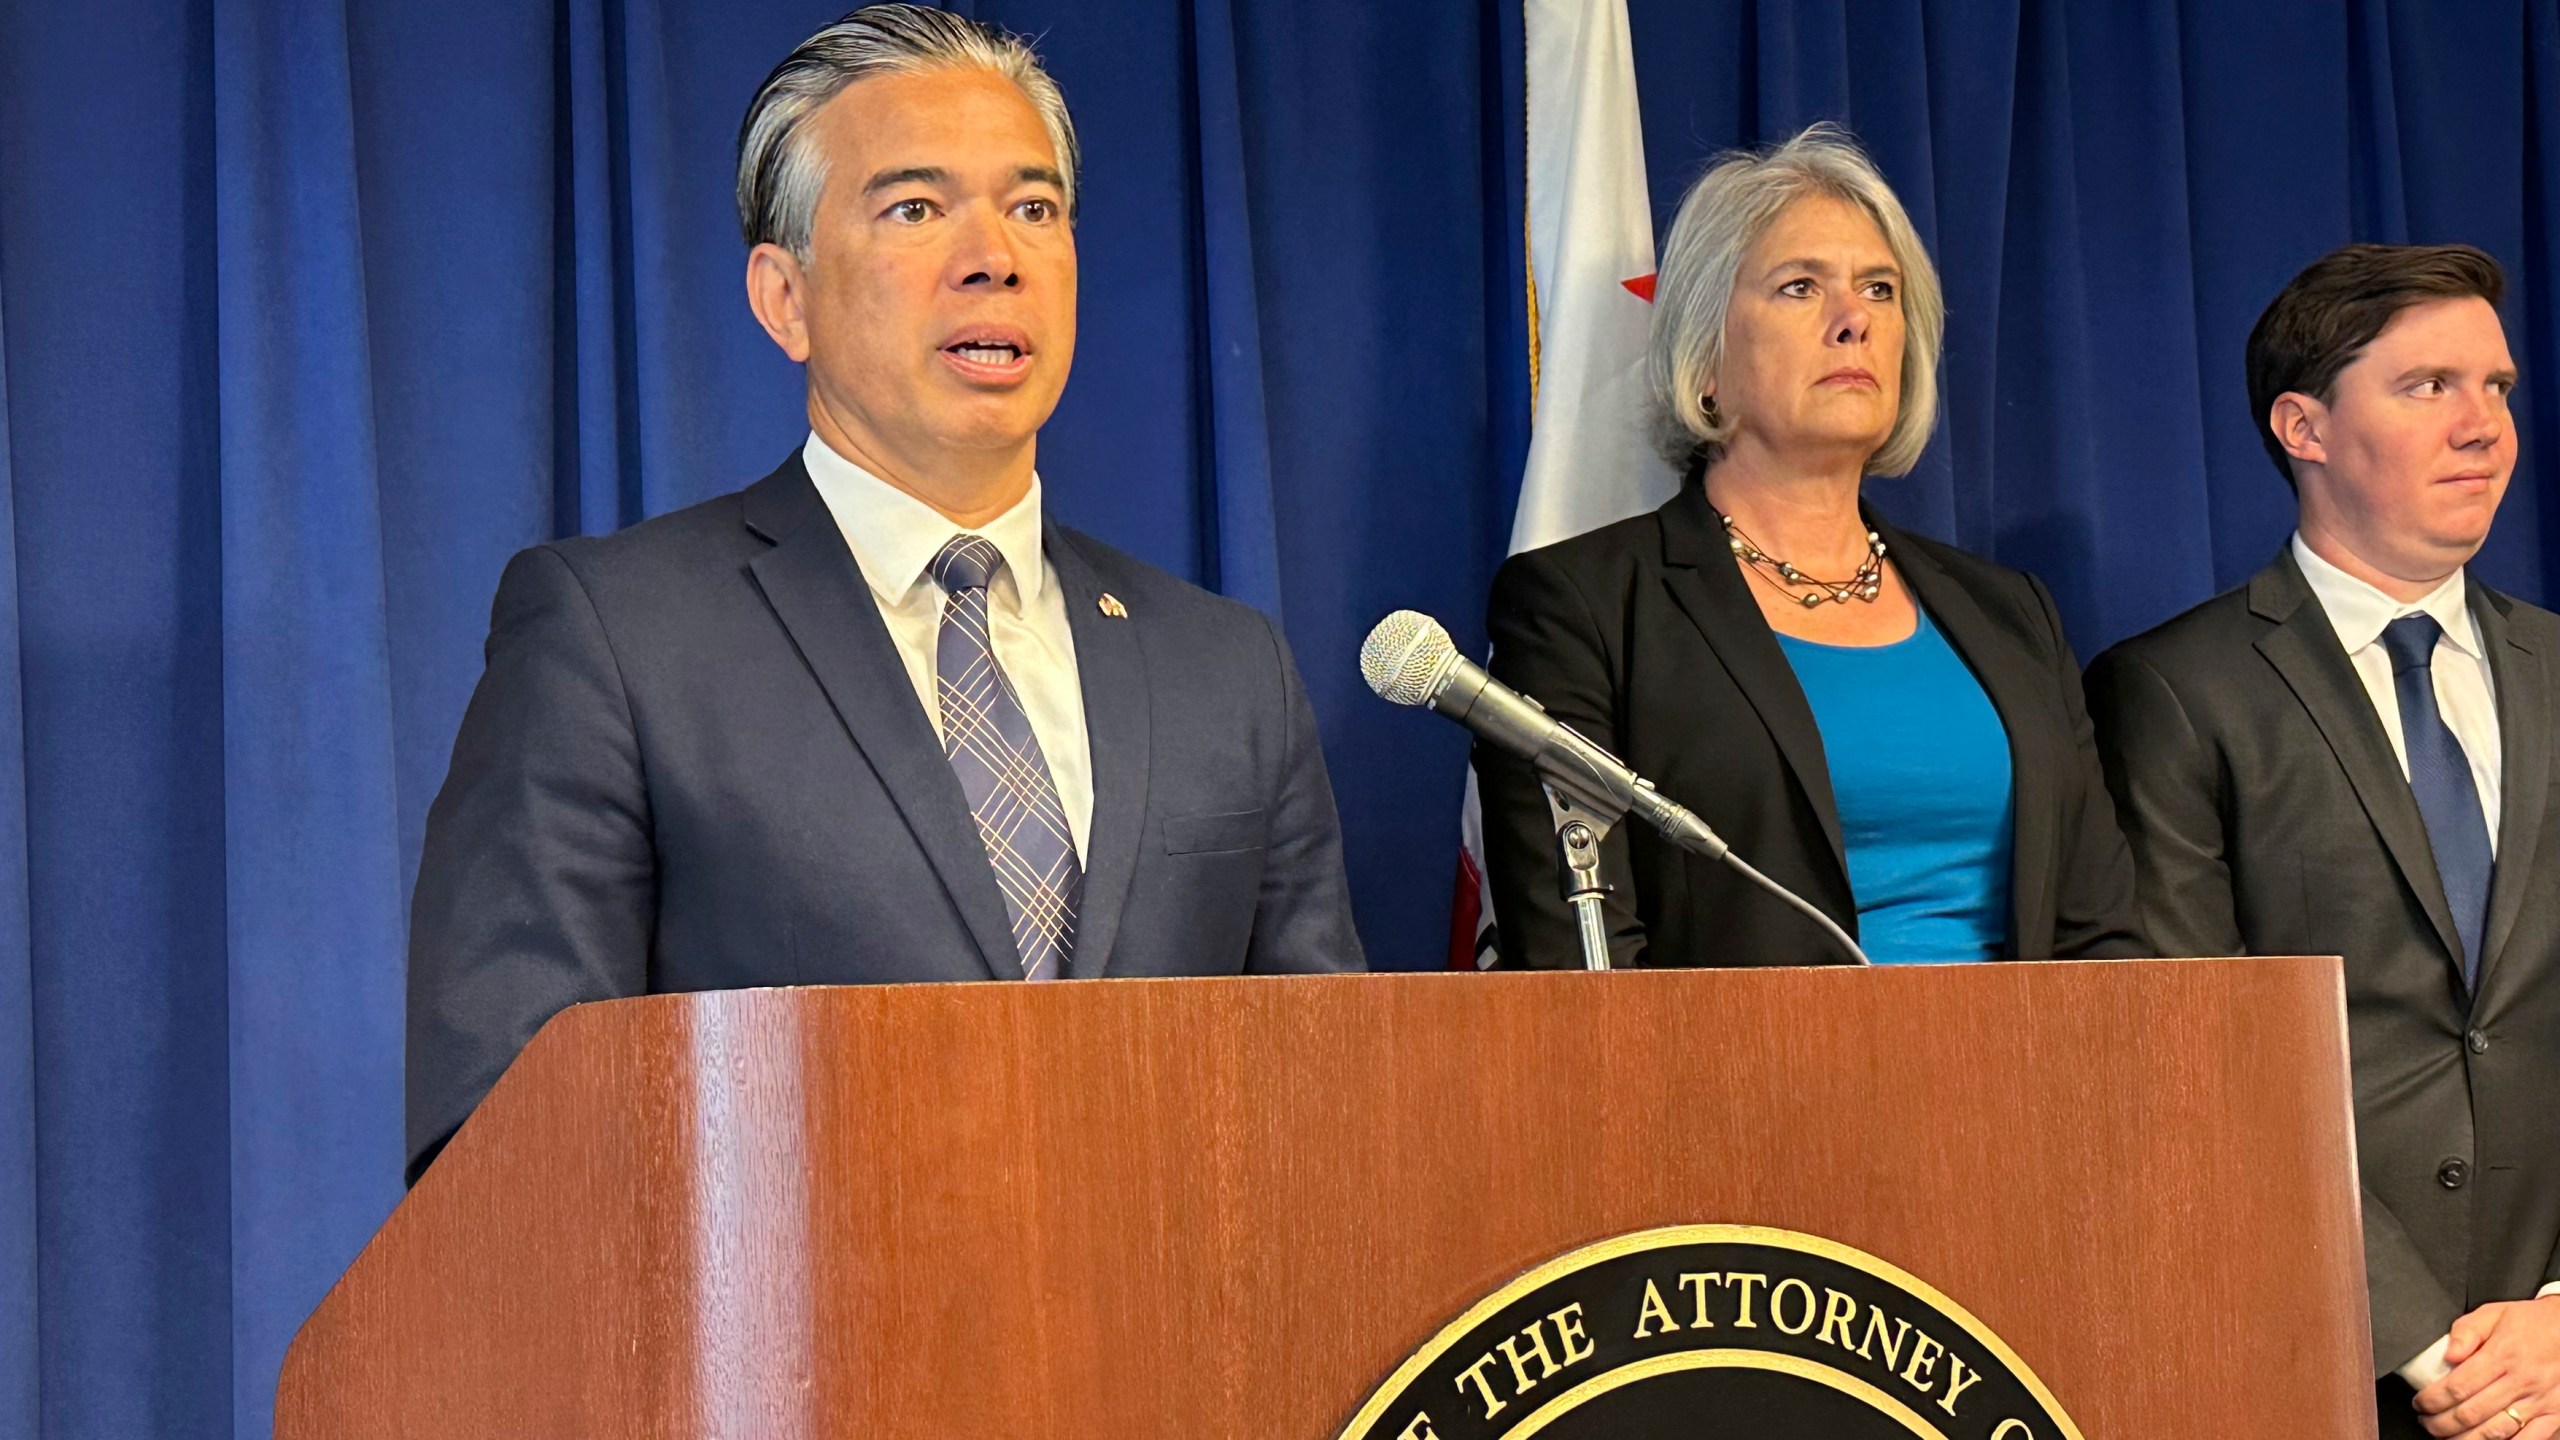 California Attorney General Rob Bonta, left, speaks during a news conference in Sacramento, California, in this undated photo.